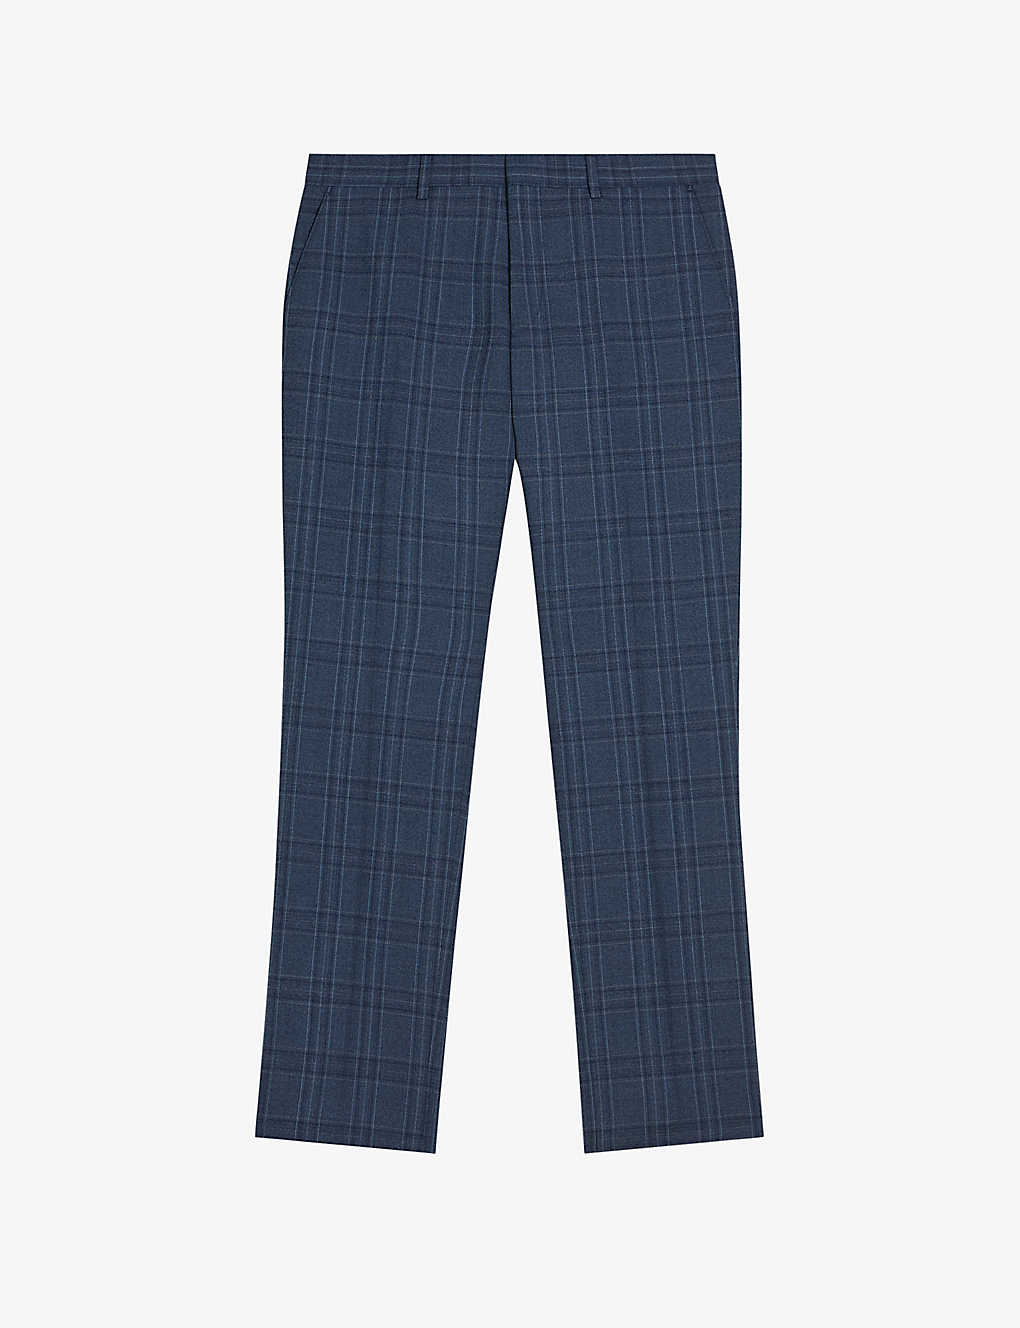 Ted Baker Mens Mid-blue Adlerst Slim-fit Check Wool Trousers